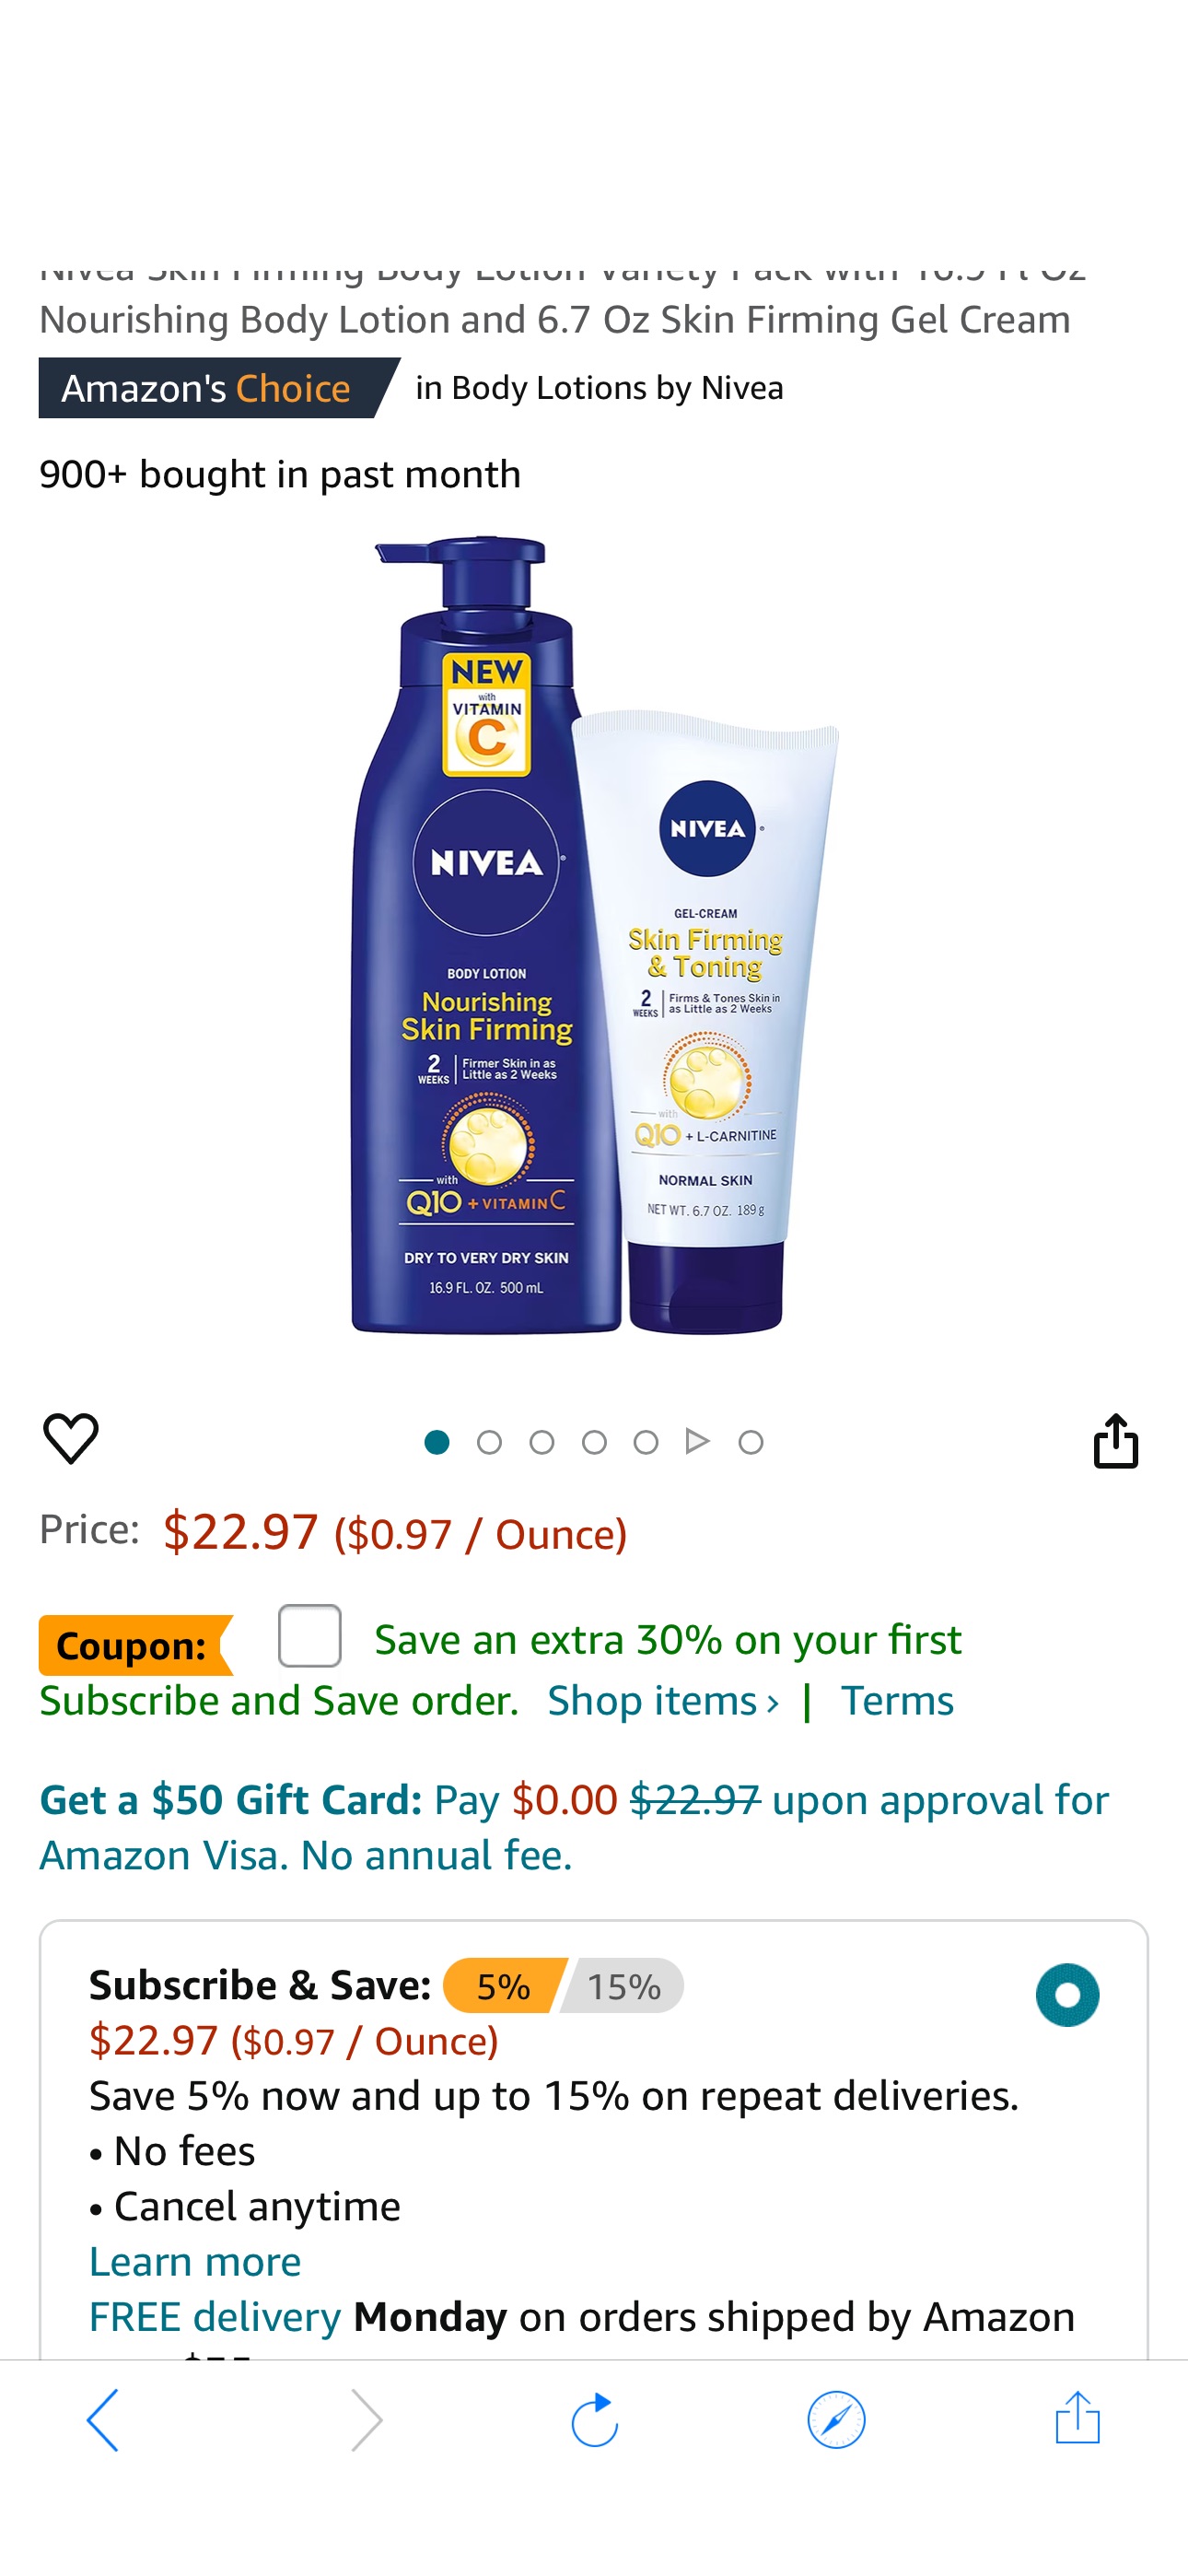 Amazon.com : Nivea Skin Firming Body Lotion Variety Pack with 16.9 Fl Oz Nourishing Body Lotion and 6.7 Oz Skin Firming Gel Cream : Beauty & Personal Care